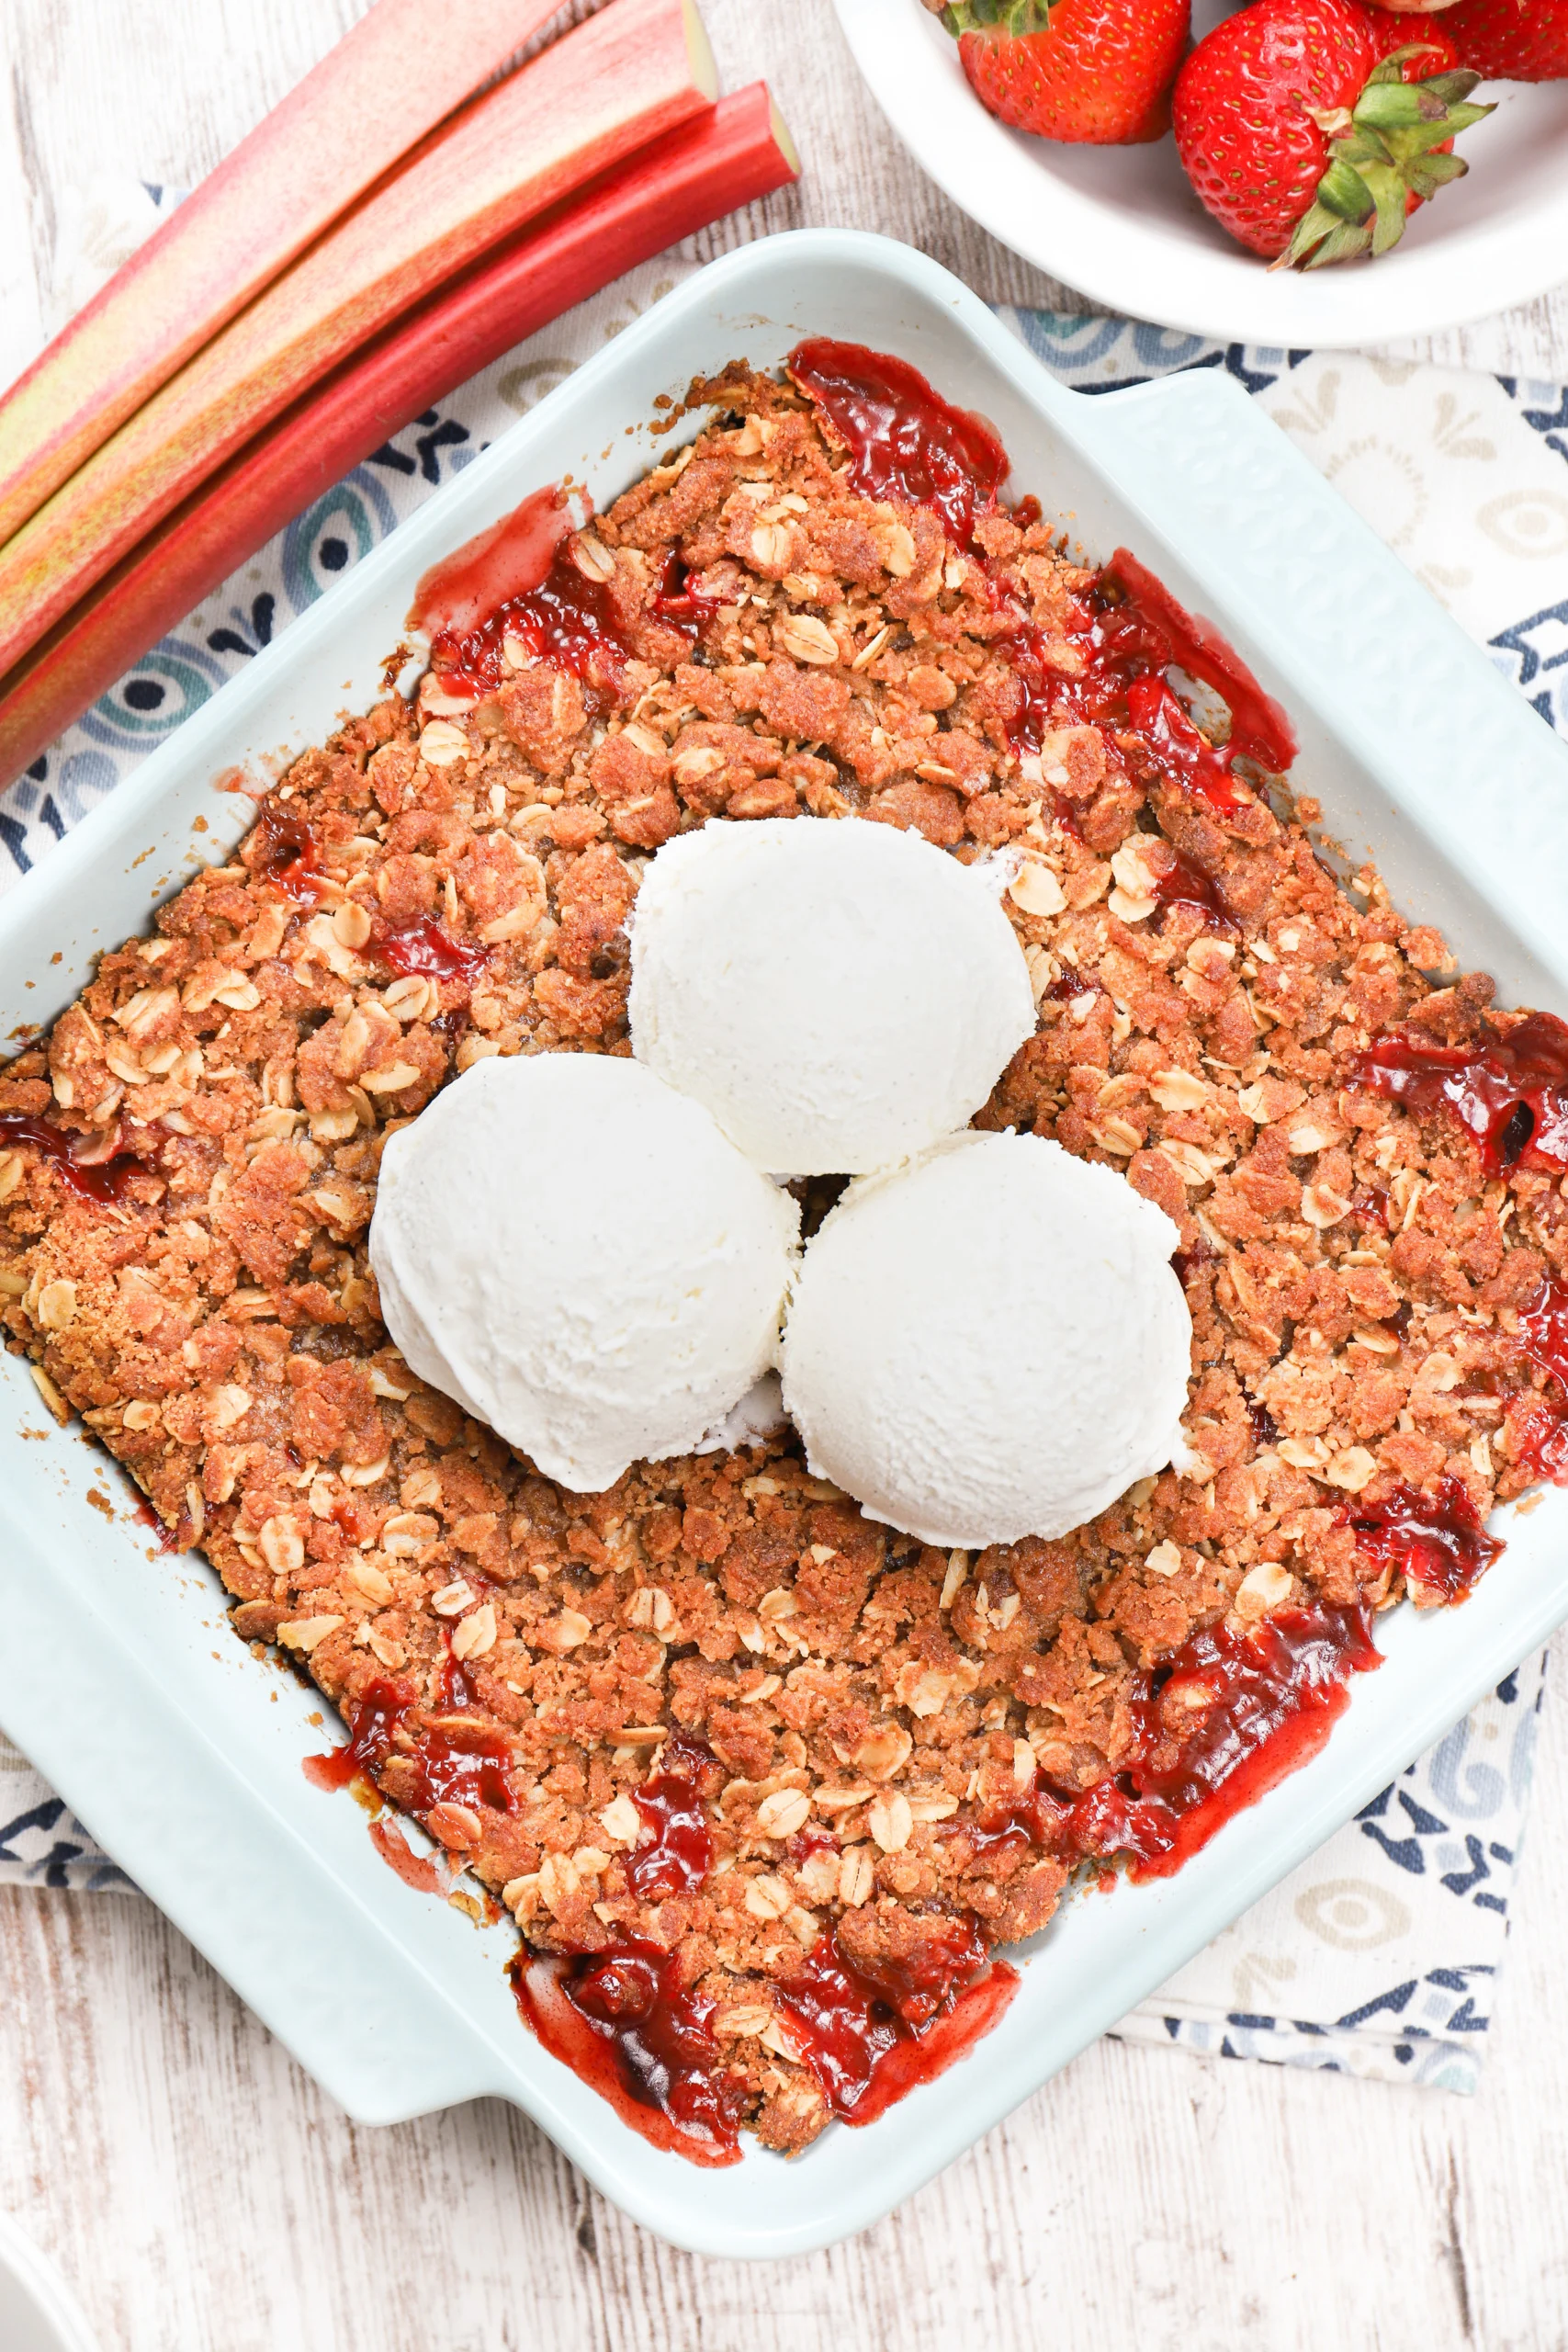 Overhead view of a batch of strawberry rhubarb crisp in a light blue dish with three scoops of vanilla ice cream on top.